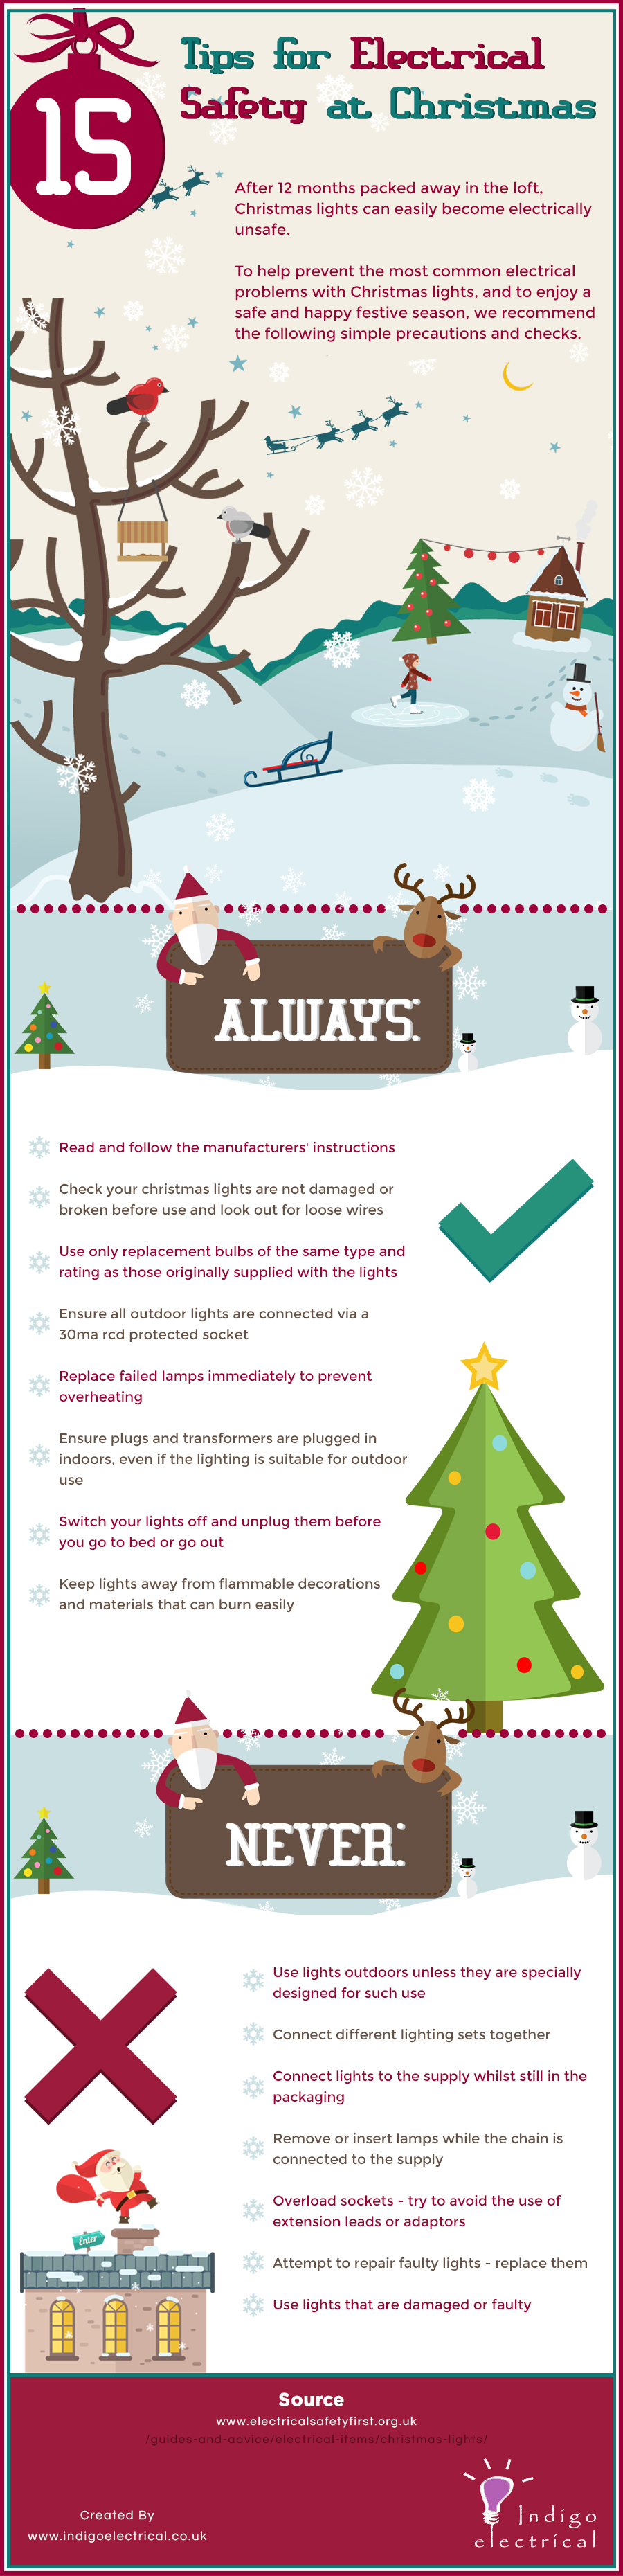 15 Tips for Electrical Safety at Christmas